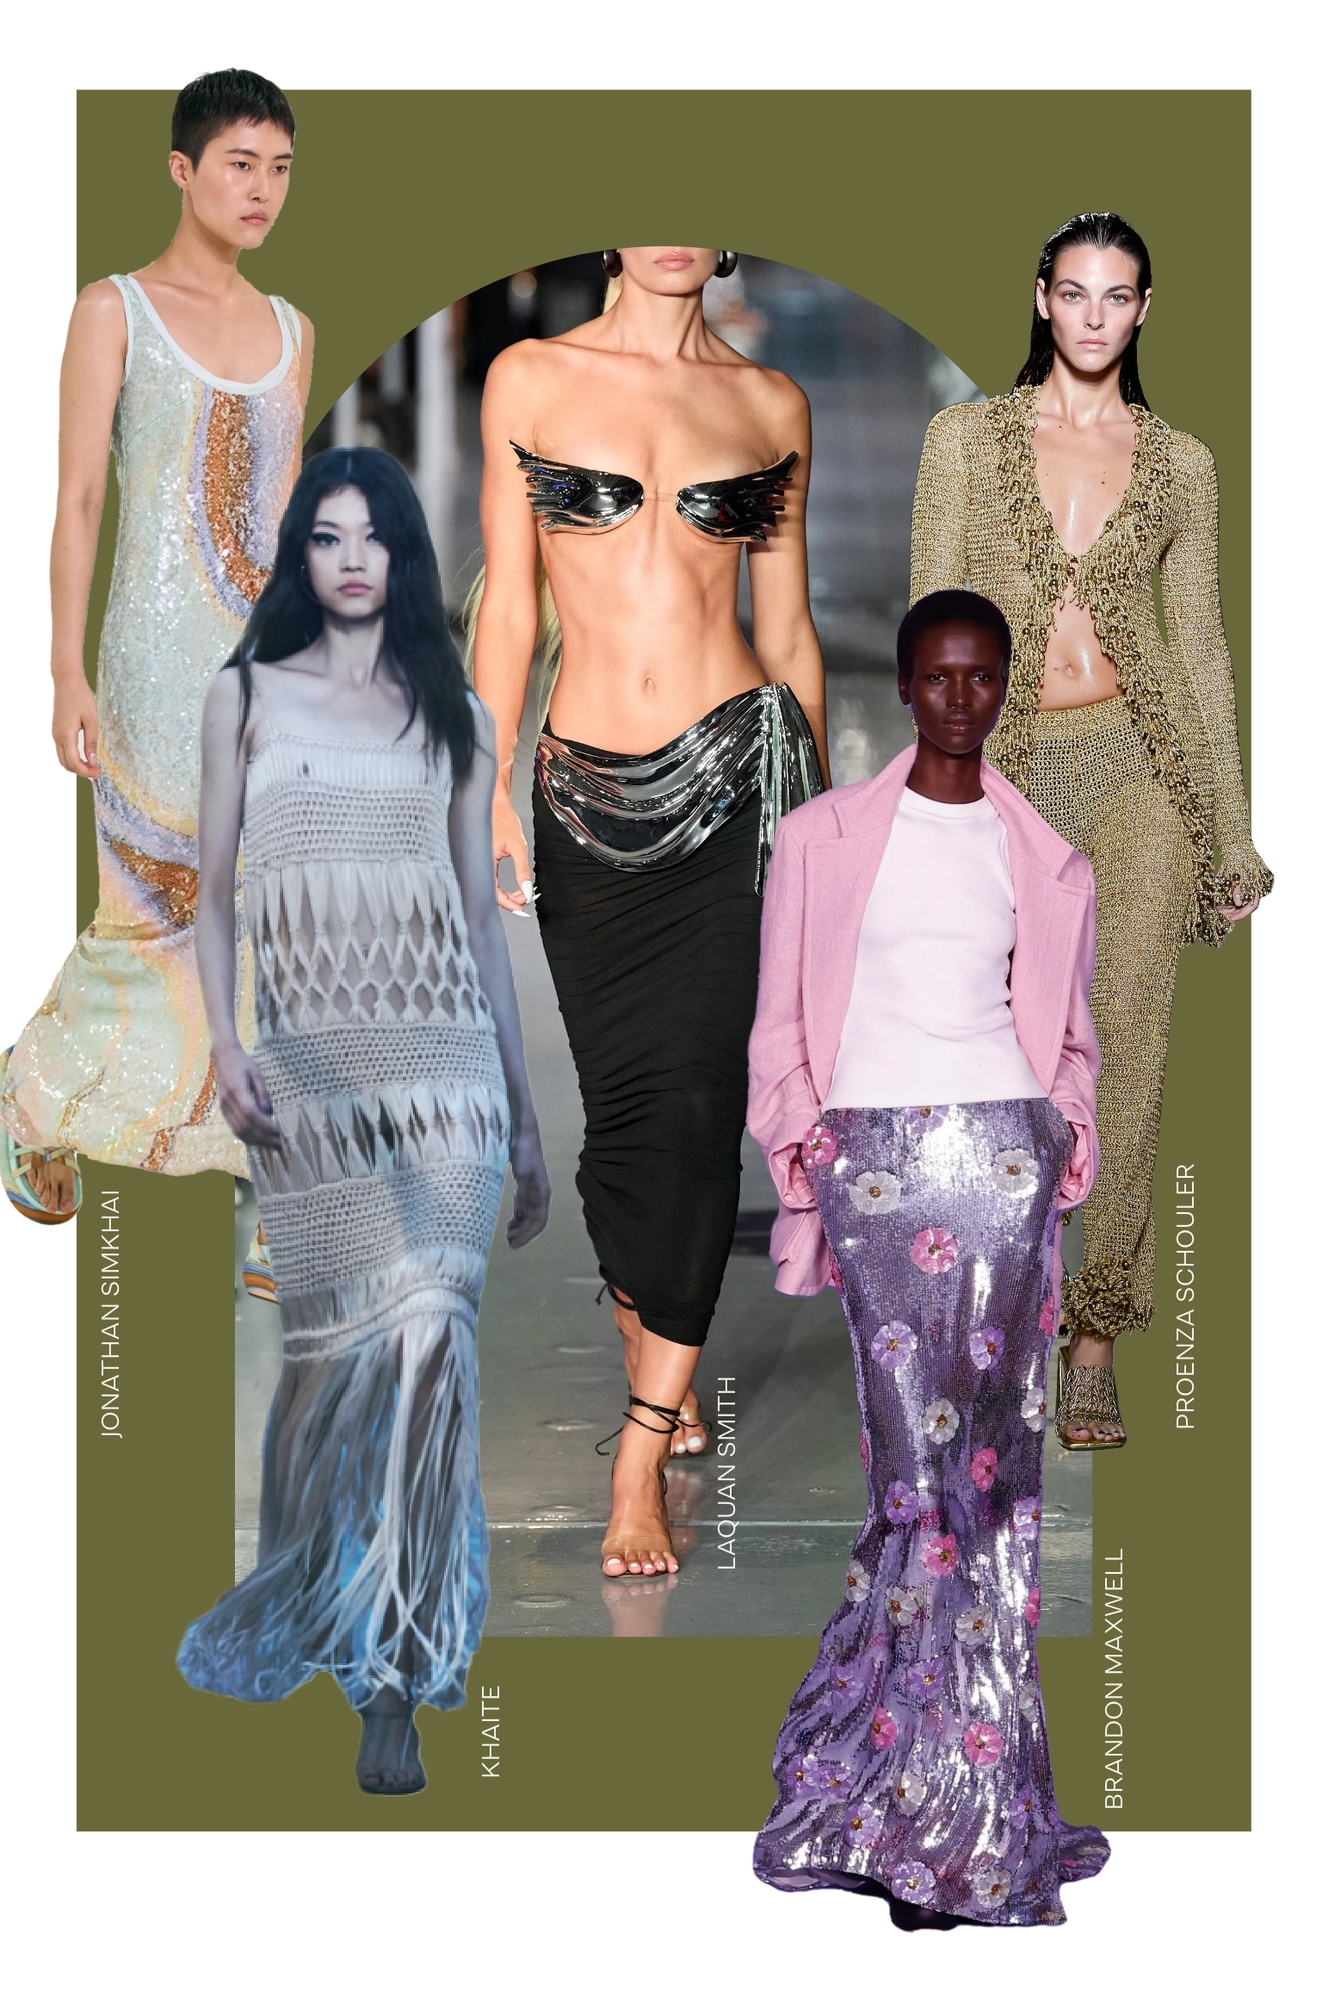 Haute stuff! Dive into the style world's most sizzling trends